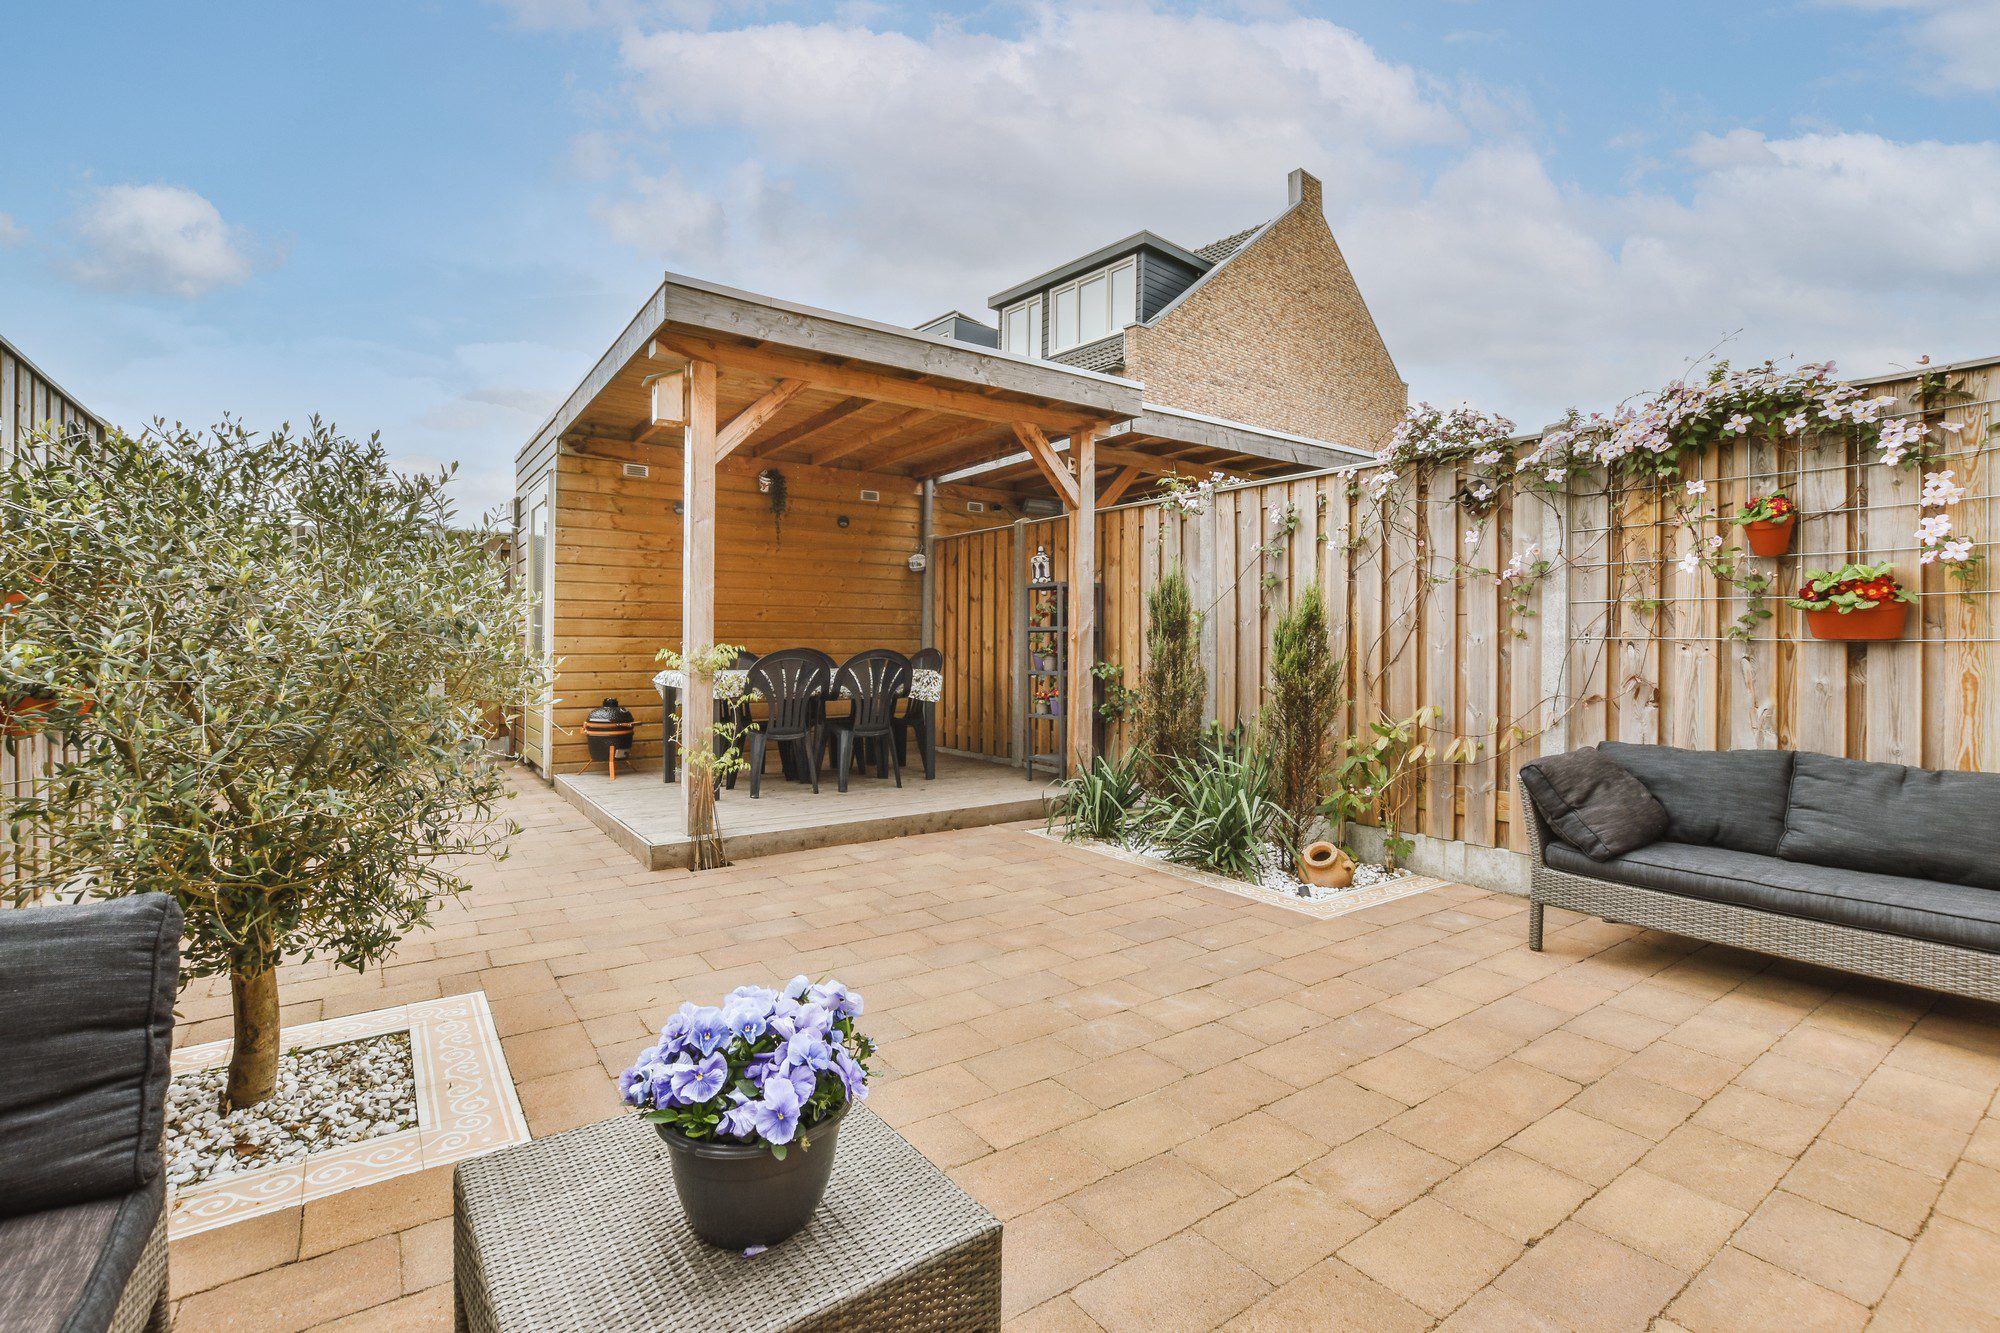 This image depicts a pleasant and well-maintained outdoor patio area of a residence. Key features include:- A spacious paved area with square stone tiles, offering plenty of room for outdoor activities and furniture.
- An inviting wooden pergola with a semi-enclosed space underneath, which houses a dining table and chairs for outdoor meals and gatherings.
- A wooden privacy fence surrounding the area, providing a sense of seclusion and privacy.
- Decorative potted plants and wall-mounted planters with blooming flowers, adding vibrant colours and greenery to the space.
- A comfortable-looking outdoor sofa providing a casual seating area, accompanied by a small wicker-type coffee table with a potted plant atop.
- An olive tree in one corner, adding an element of Mediterranean flair.
- Various gardening pots and accessories suggesting an interest in horticulture by the residents.Overall, the image conveys a cosy and inviting atmosphere for outdoor relaxation and entertainment.